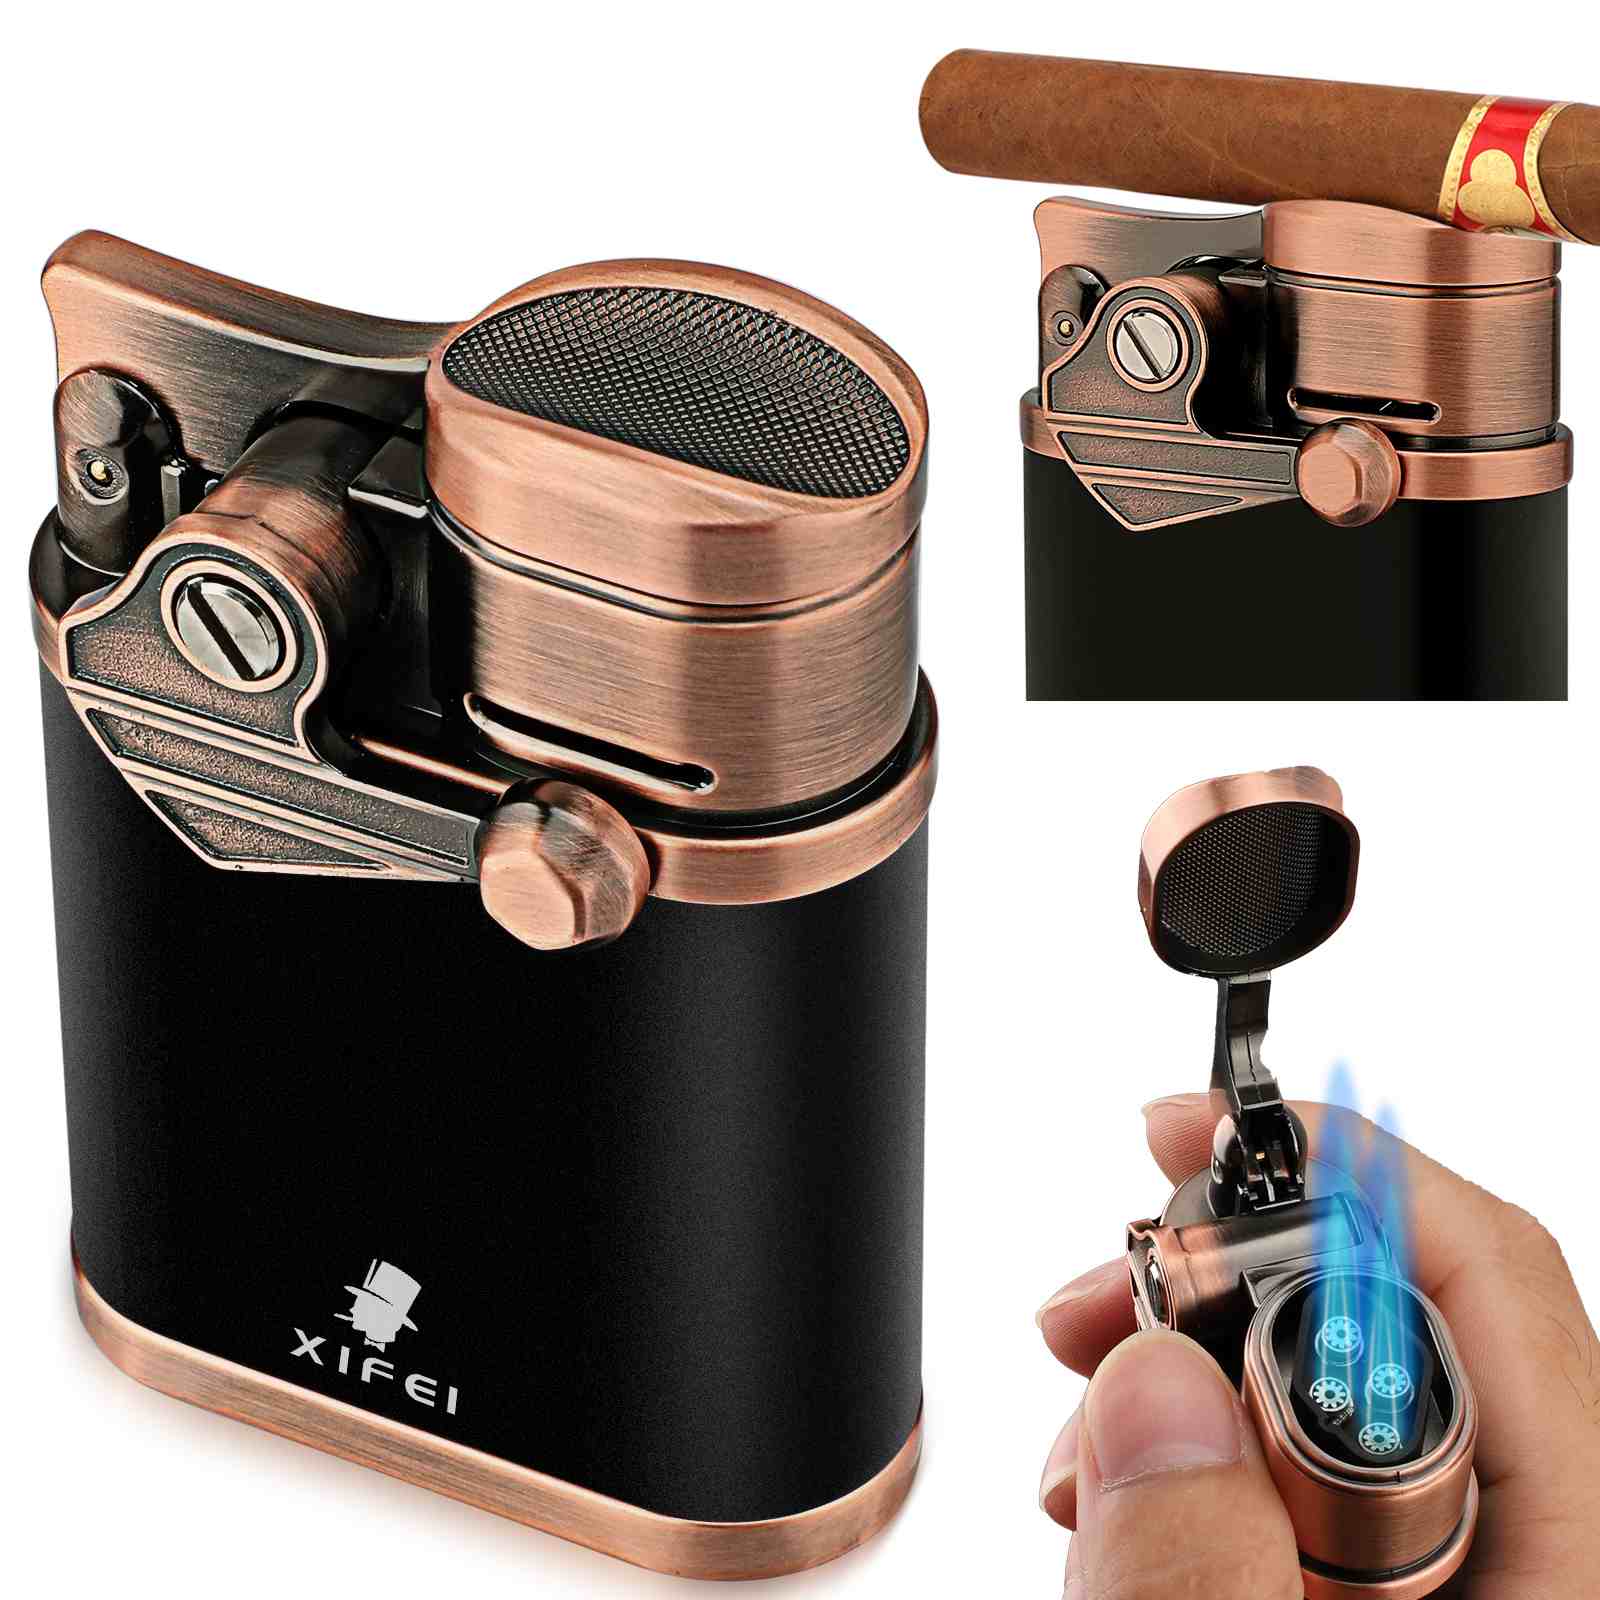 XIFEI 4 Jet Flame Torch Lighter with Cigar Stand, Windproof Rocker Lighter  with Adjustable Flame, Refillable Butane Lighter for Smoking